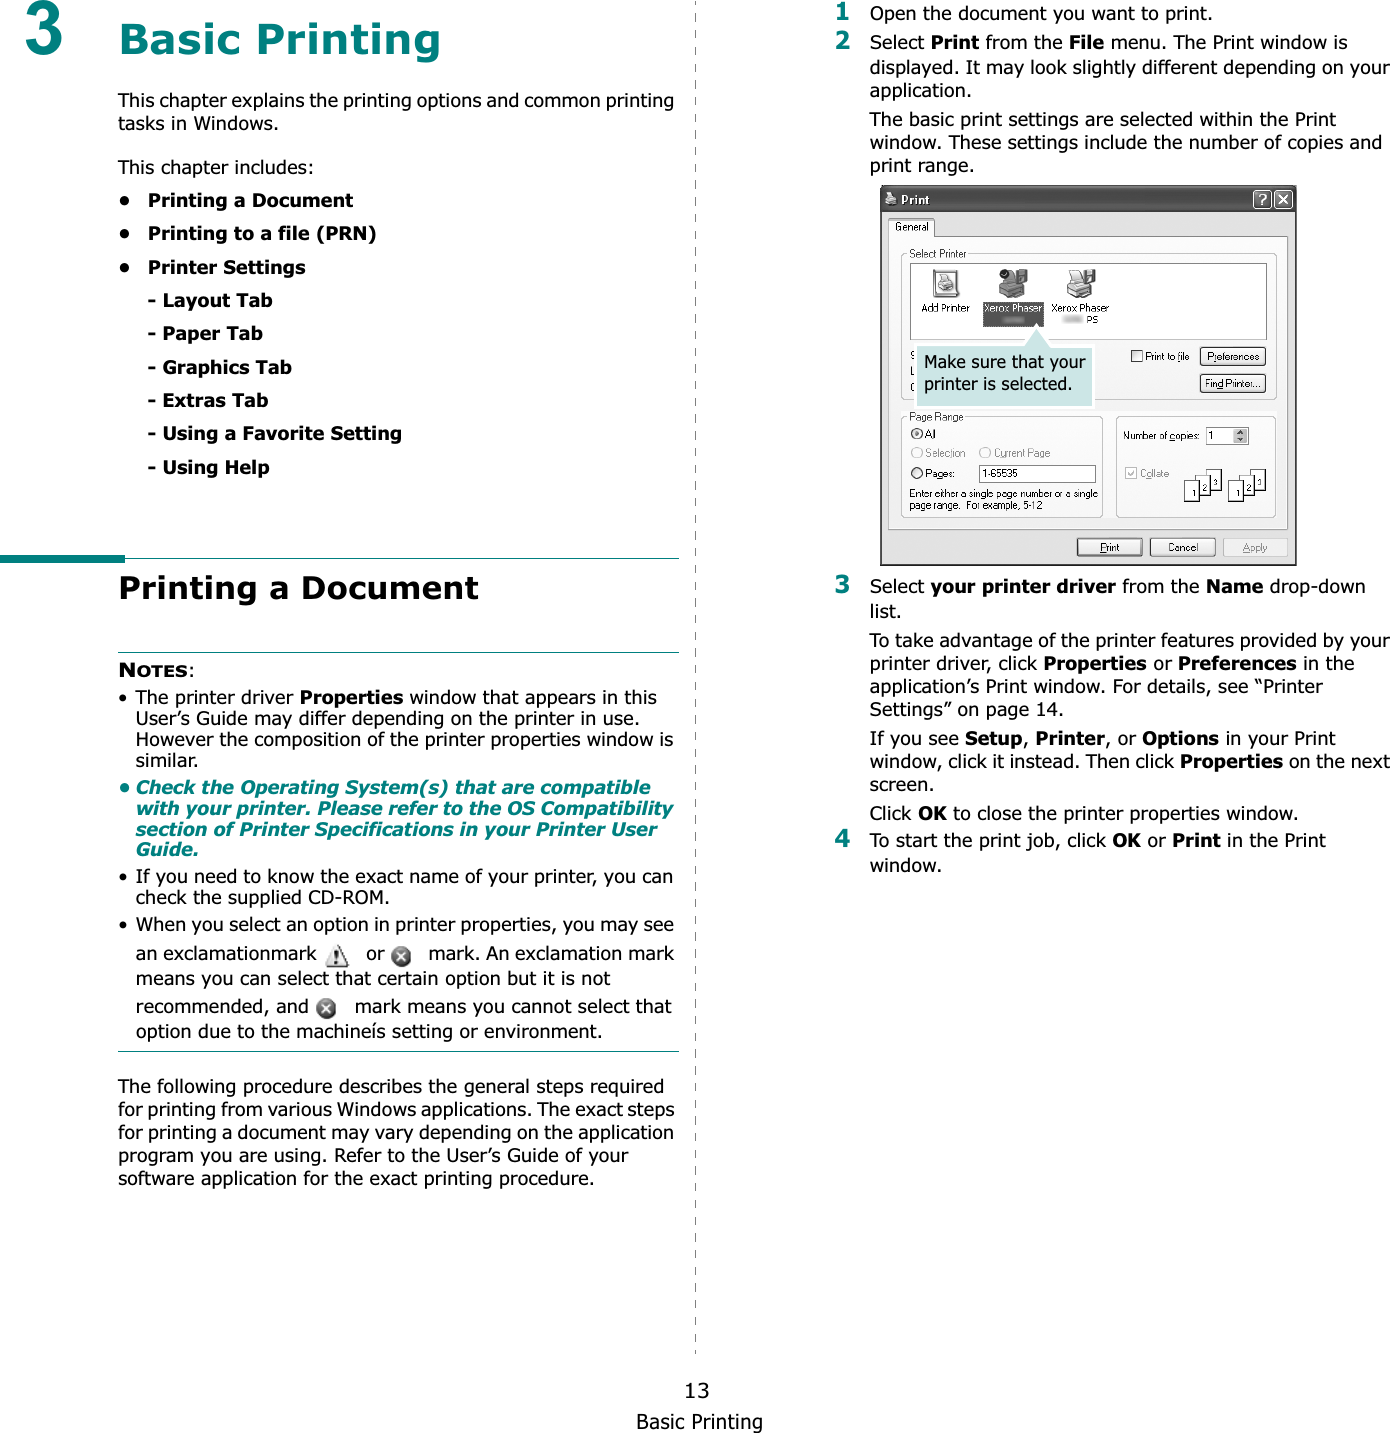 Basic Printing133Basic Printing This chapter explains the printing options and common printing tasks in Windows. This chapter includes:• Printing a Document• Printing to a file (PRN)• Printer Settings- Layout Tab- Paper Tab- Graphics Tab- Extras Tab- Using a Favorite Setting- Using HelpPrinting a DocumentNOTES:• The printer driver Properties window that appears in this User’s Guide may differ depending on the printer in use. However the composition of the printer properties window is similar.• Check the Operating System(s) that are compatible with your printer. Please refer to the OS Compatibility section of Printer Specifications in your Printer User Guide.• If you need to know the exact name of your printer, you can check the supplied CD-ROM.• When you select an option in printer properties, you may see an exclamationmark    or   mark. An exclamation mark means you can select that certain option but it is not recommended, and   mark means you cannot select that option due to the machineís setting or environment.The following procedure describes the general steps required for printing from various Windows applications. The exact steps for printing a document may vary depending on the application program you are using. Refer to the User’s Guide of your software application for the exact printing procedure.1Open the document you want to print.2Select Print from the File menu. The Print window is displayed. It may look slightly different depending on your application. The basic print settings are selected within the Print window. These settings include the number of copies and print range.3Select your printer driver from the Name drop-down list.To take advantage of the printer features provided by your printer driver, click Properties or Preferences in the application’s Print window. For details, see “Printer Settings” on page 14.If you see Setup,Printer, or Options in your Print window, click it instead. Then click Properties on the next screen.Click OK to close the printer properties window.4To start the print job, click OK or Print in the Print window.Make sure that your printer is selected.